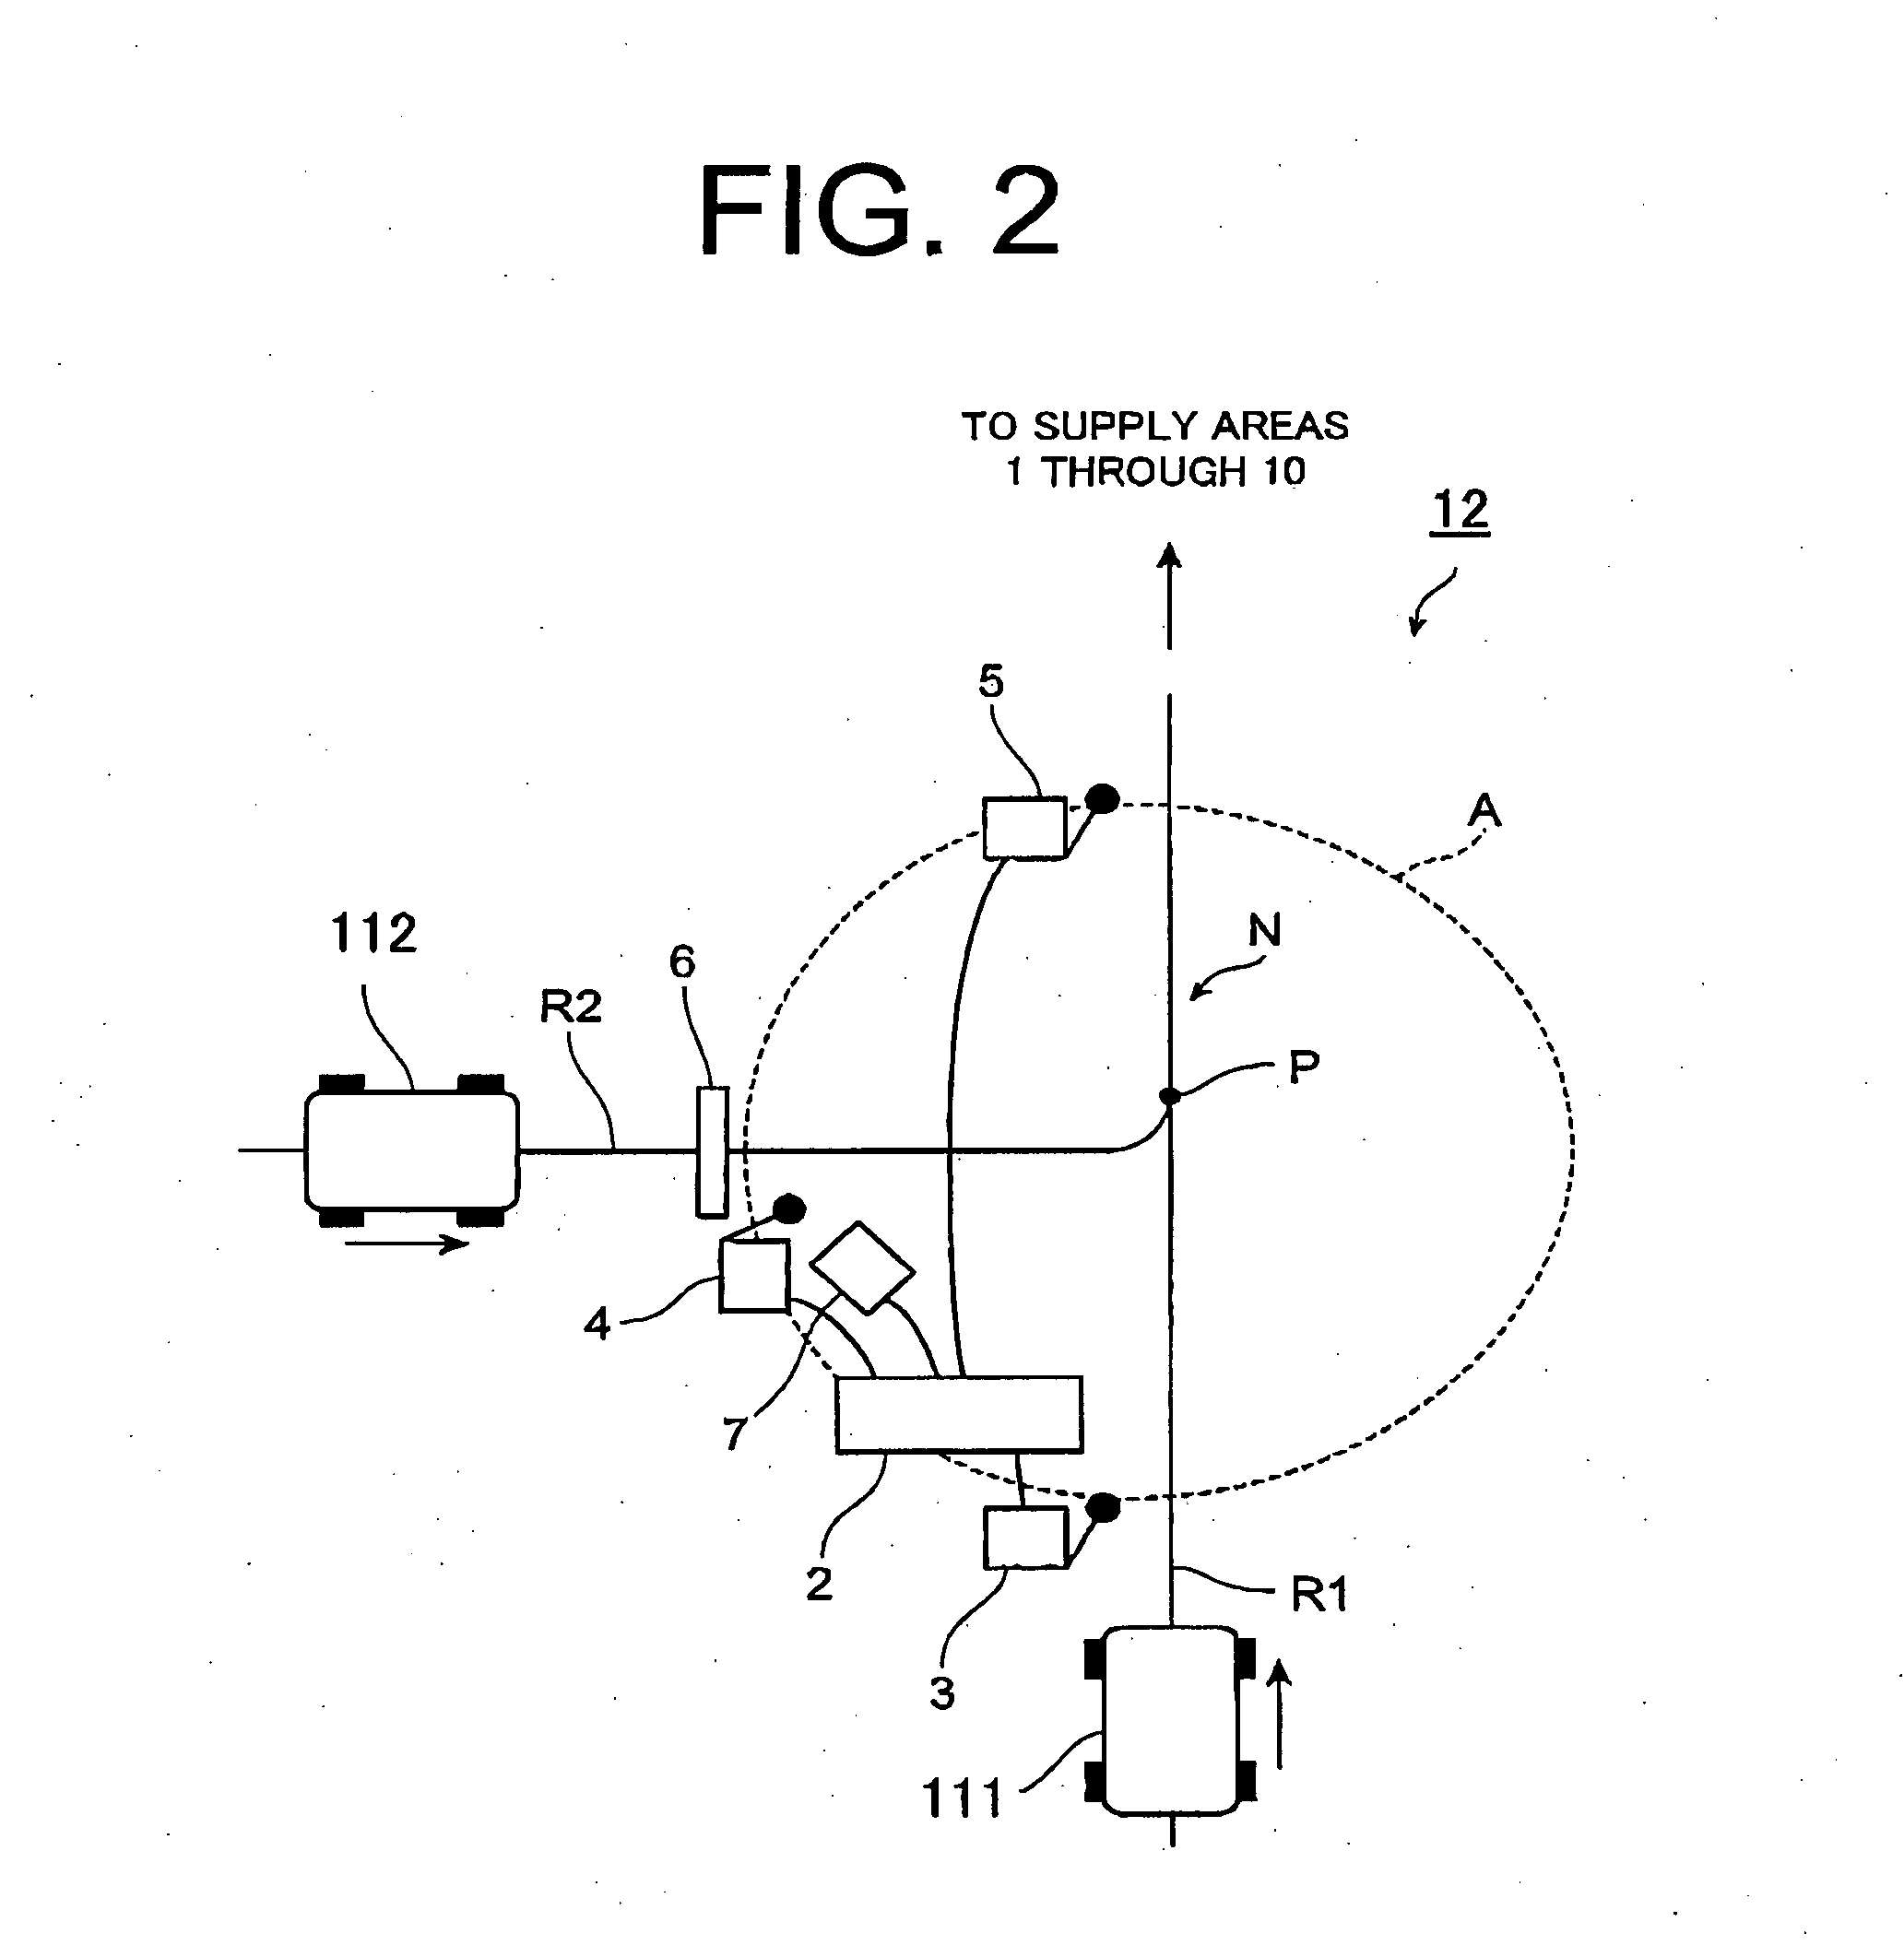 Travel control system for travel vehicle